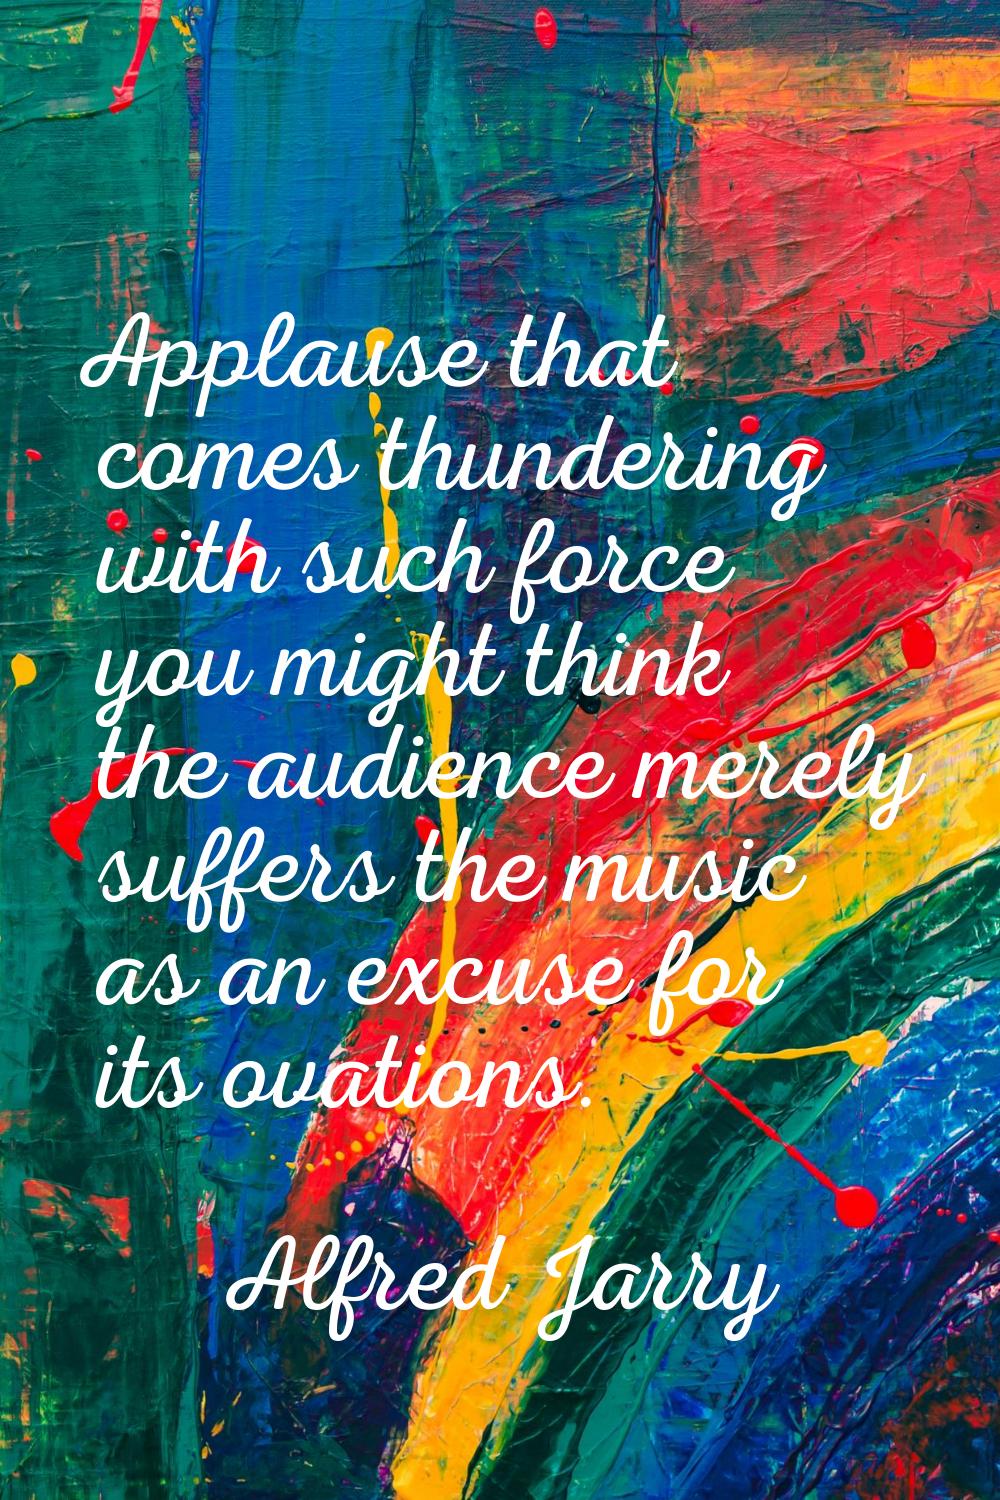 Applause that comes thundering with such force you might think the audience merely suffers the musi